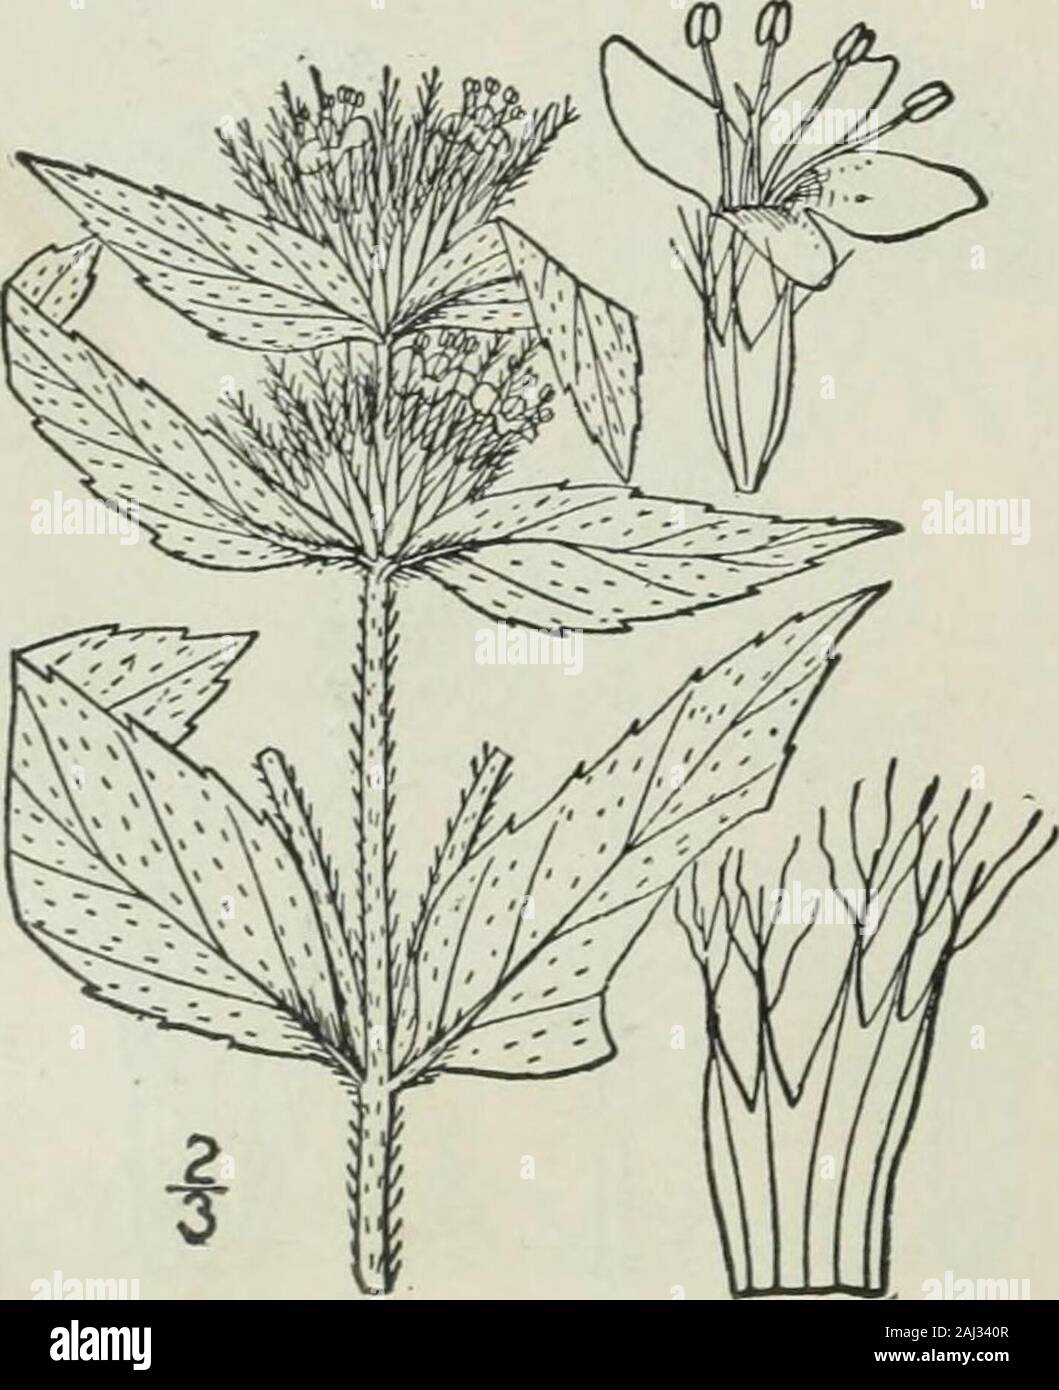 An illustrated flora of the northern United States, Canada and the British possessions : from Newfoundland to the parallel of the southern boundary of Virginia and from the Atlantic Ocean westward to the 102nd meridian . 9. Koellia pycnanthemoides (Leavenw.) Kuntze. Fig. 3668. Southern Mountain-Mint.. Tullia pycnanthemoides Leavenw. Am. Journ. Sci. 20: 343. pi. 5. 1830.P. Tullia Benth. Lab. Gen. & Sp. 328. 1834.K. pycnanthemoides Kuntze, Rev. Gen. Pi. 520. 1891.P. pycnanthemoides Fernald, Rhodora 10: 86. 1908. Stem rather stout, pubescent nearly to the base,2°-3° high. Leaves membranous, petio Stock Photo